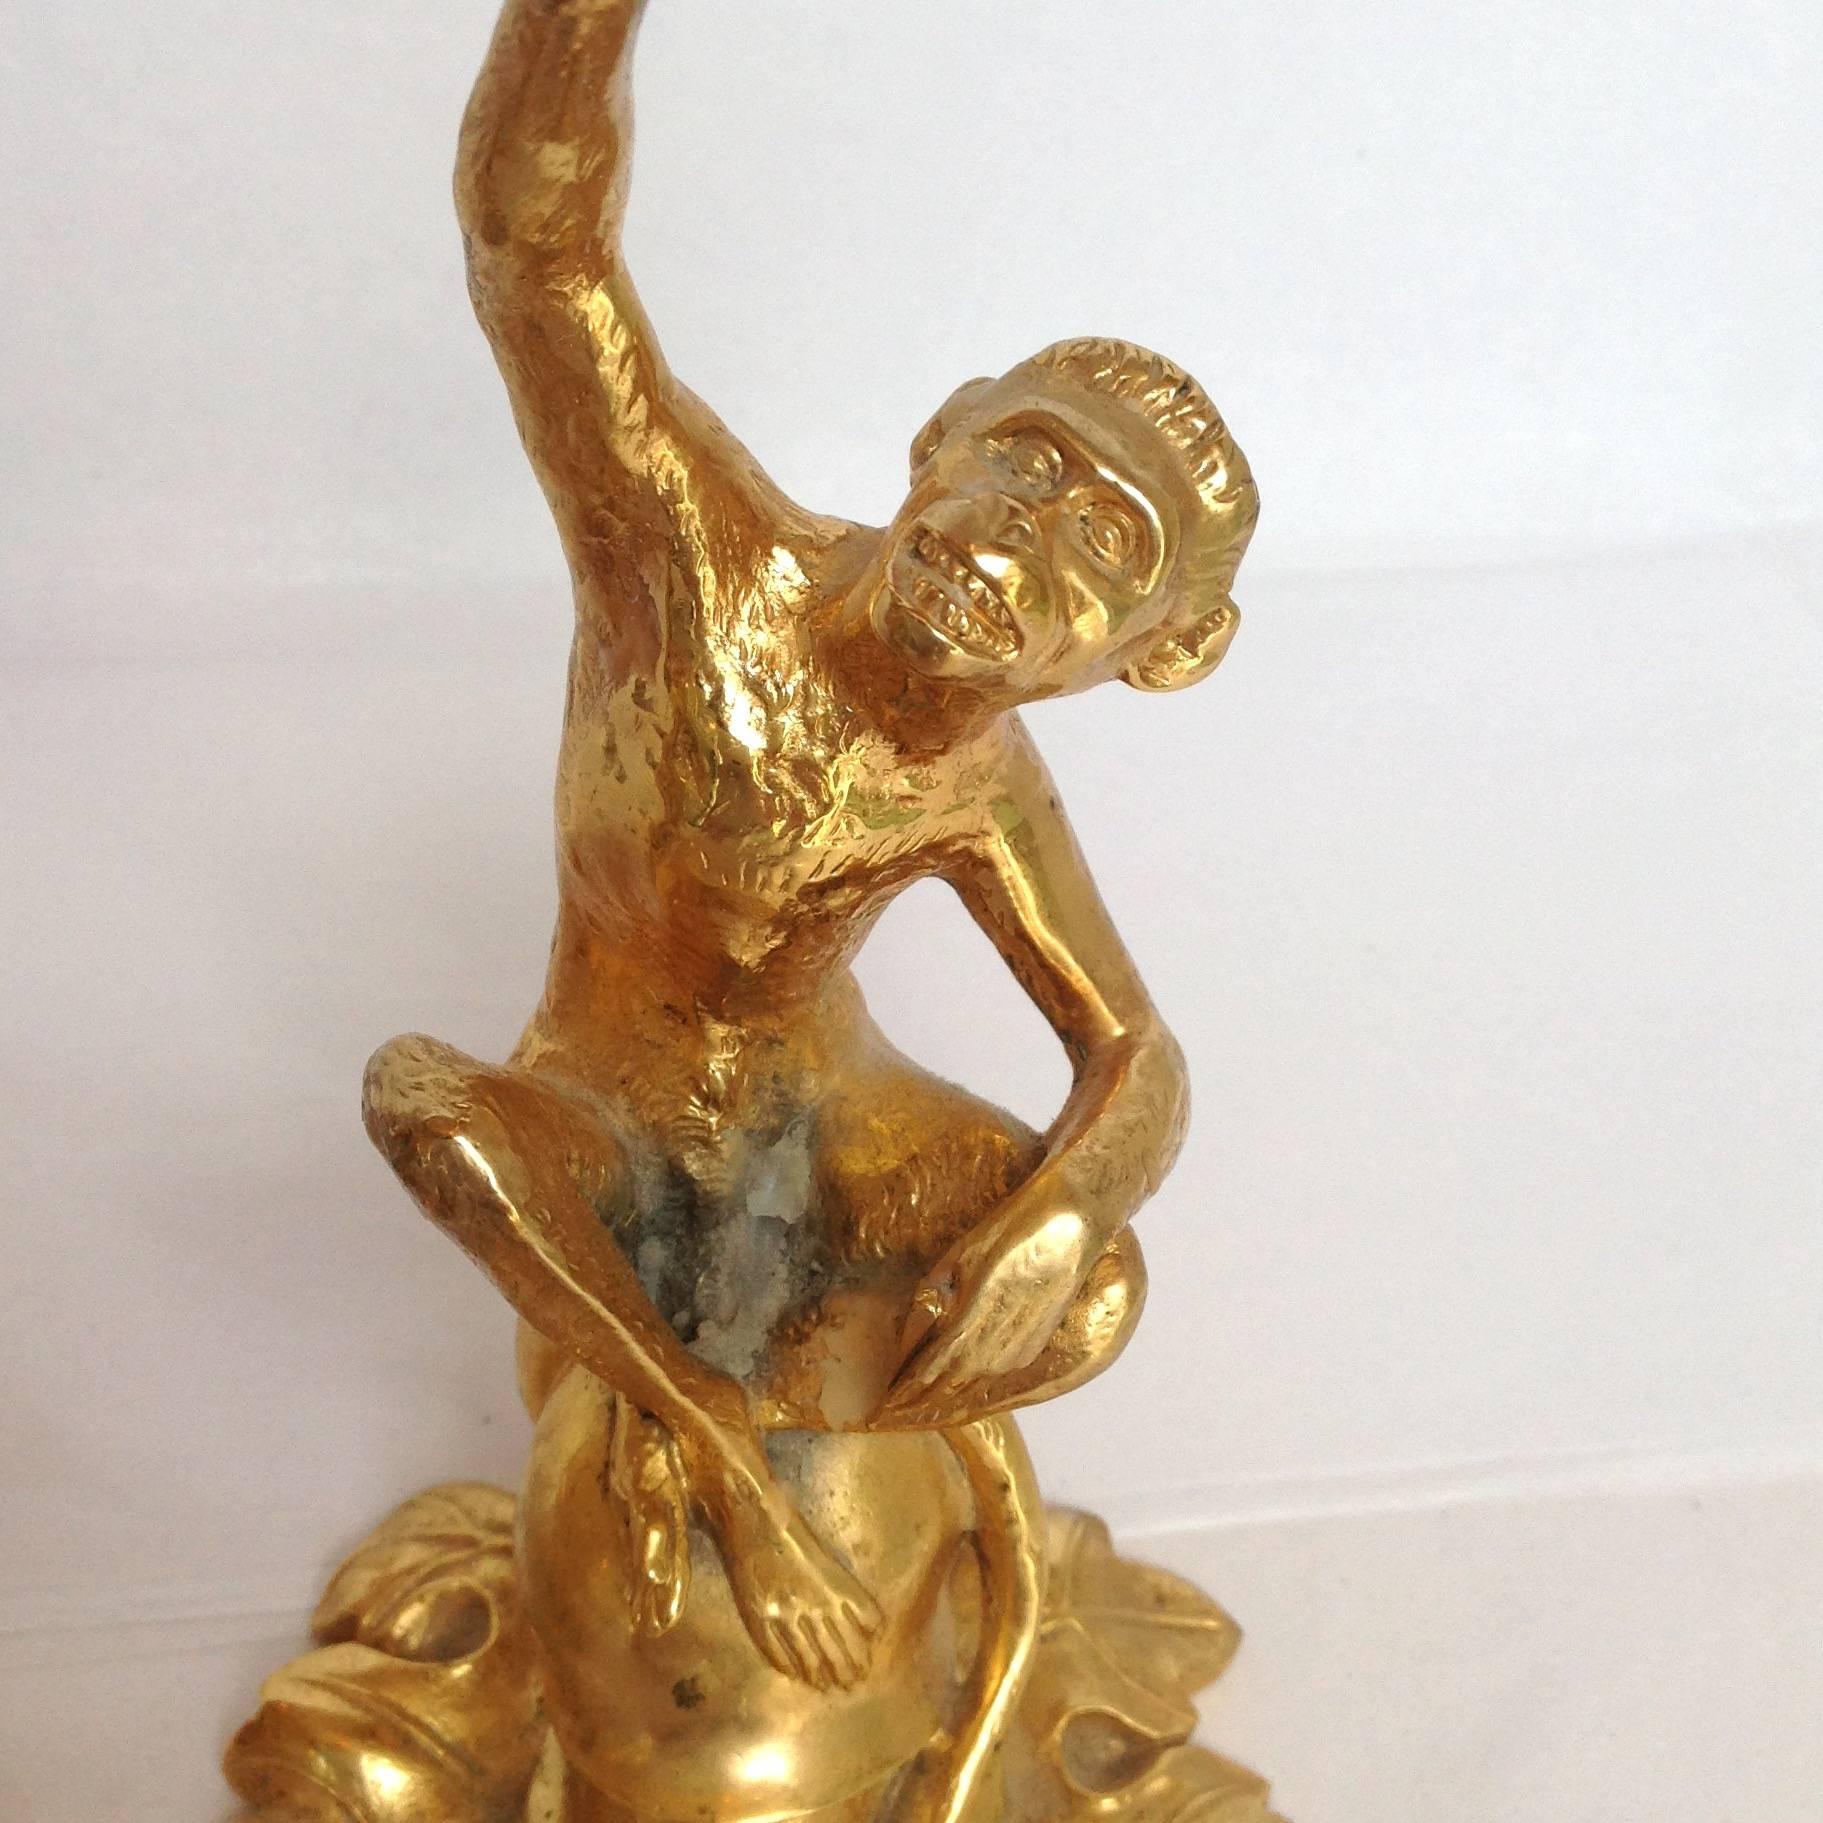 Monkey Riding Snail Candlesticks Gilt Bronze In Excellent Condition For Sale In Houston, TX